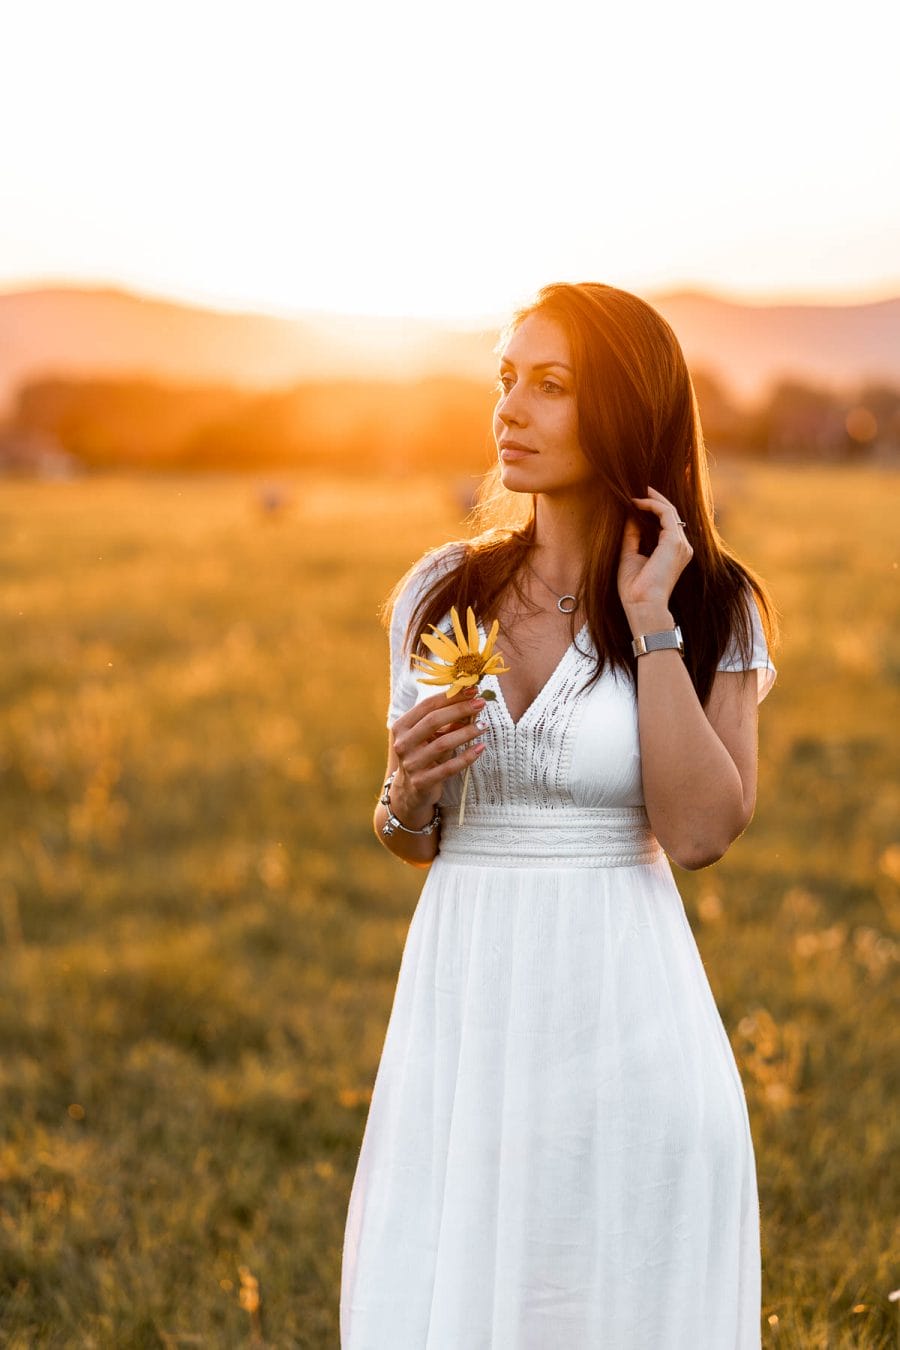 Girl in a white dress standing on a field at sunset